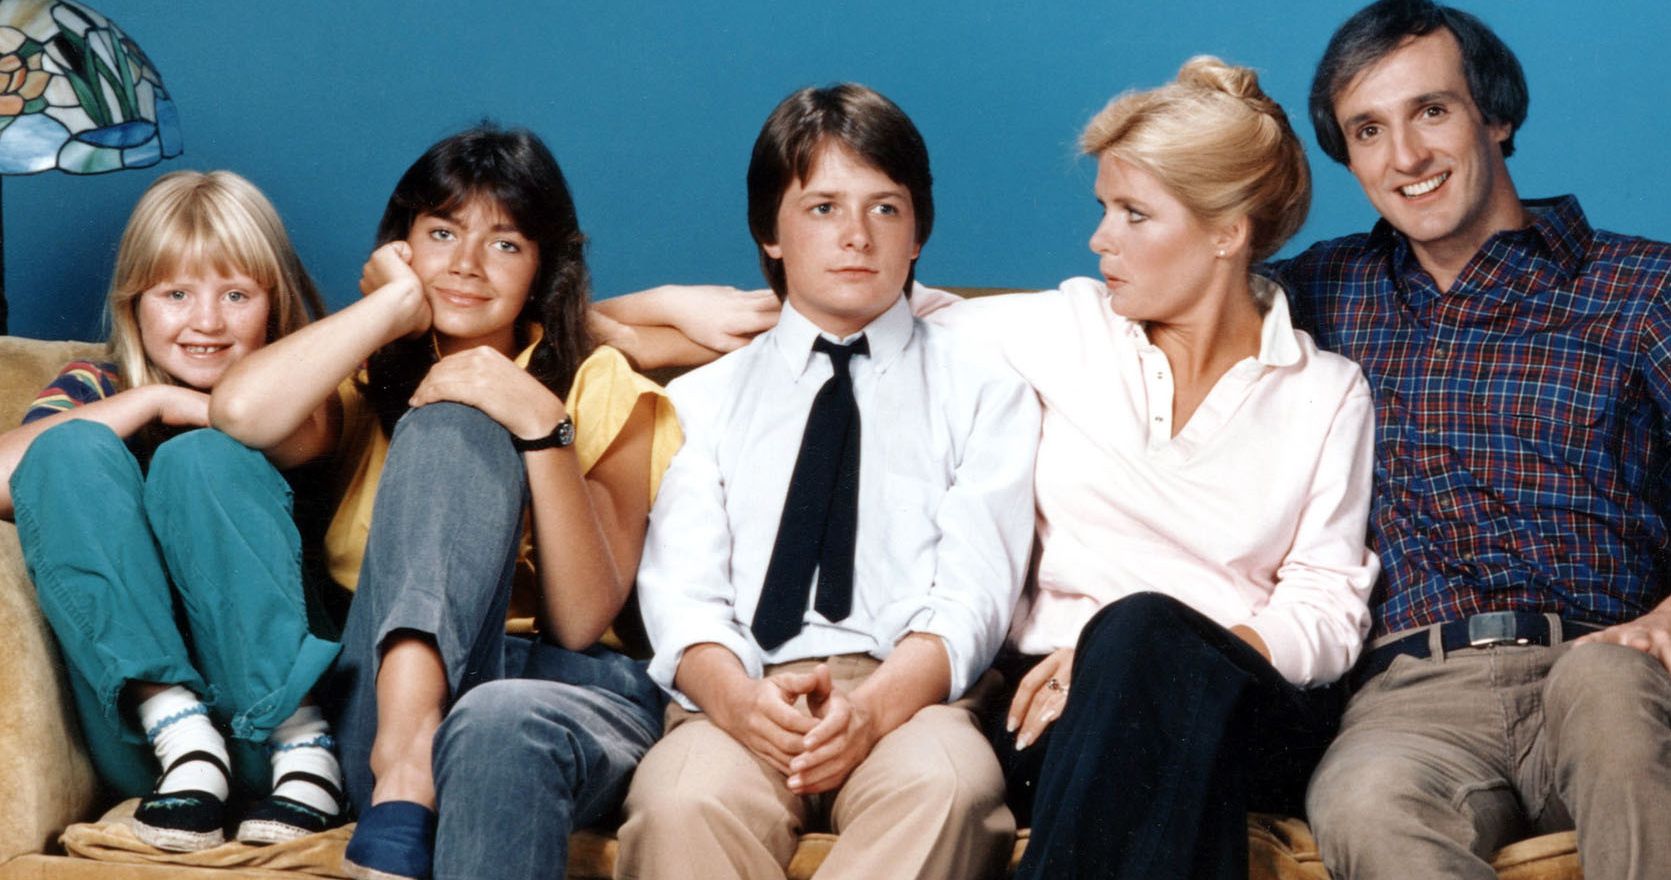 Family Ties Cast Reunion Is Happening This Month for a Good Cause